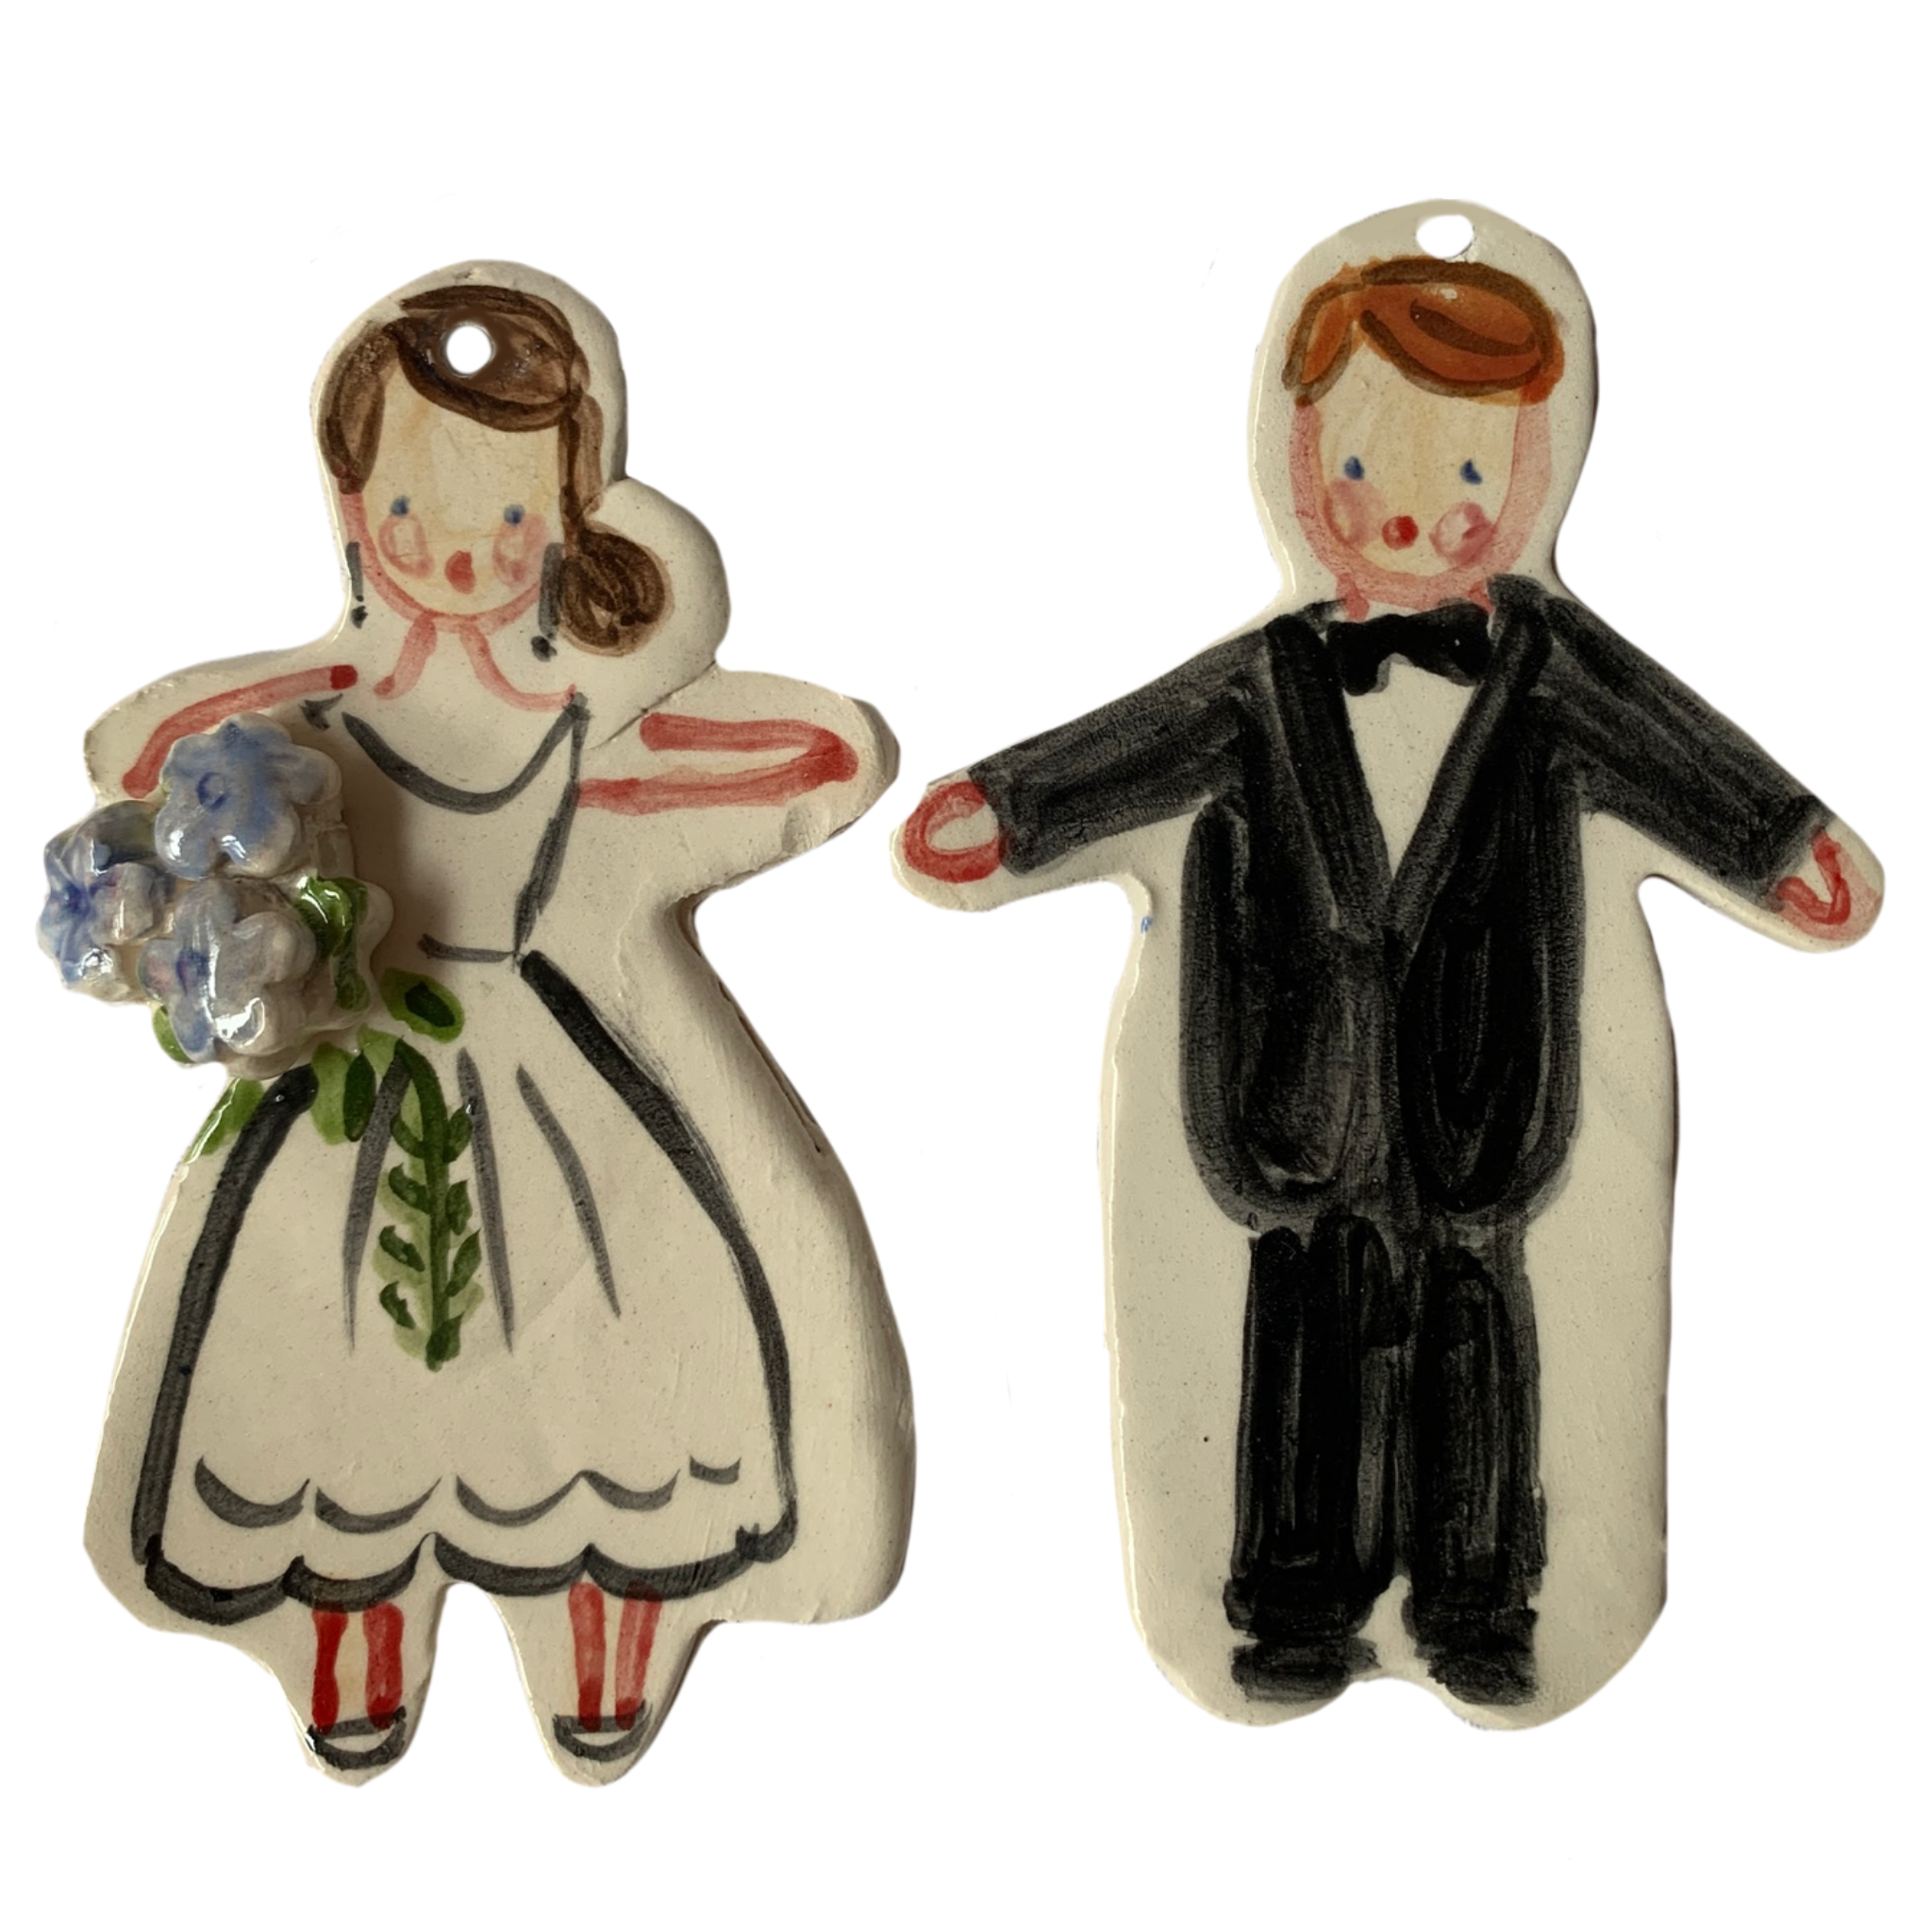 Bride and Groom Ornament set - Premium  from Tricia Lowenfield Design 